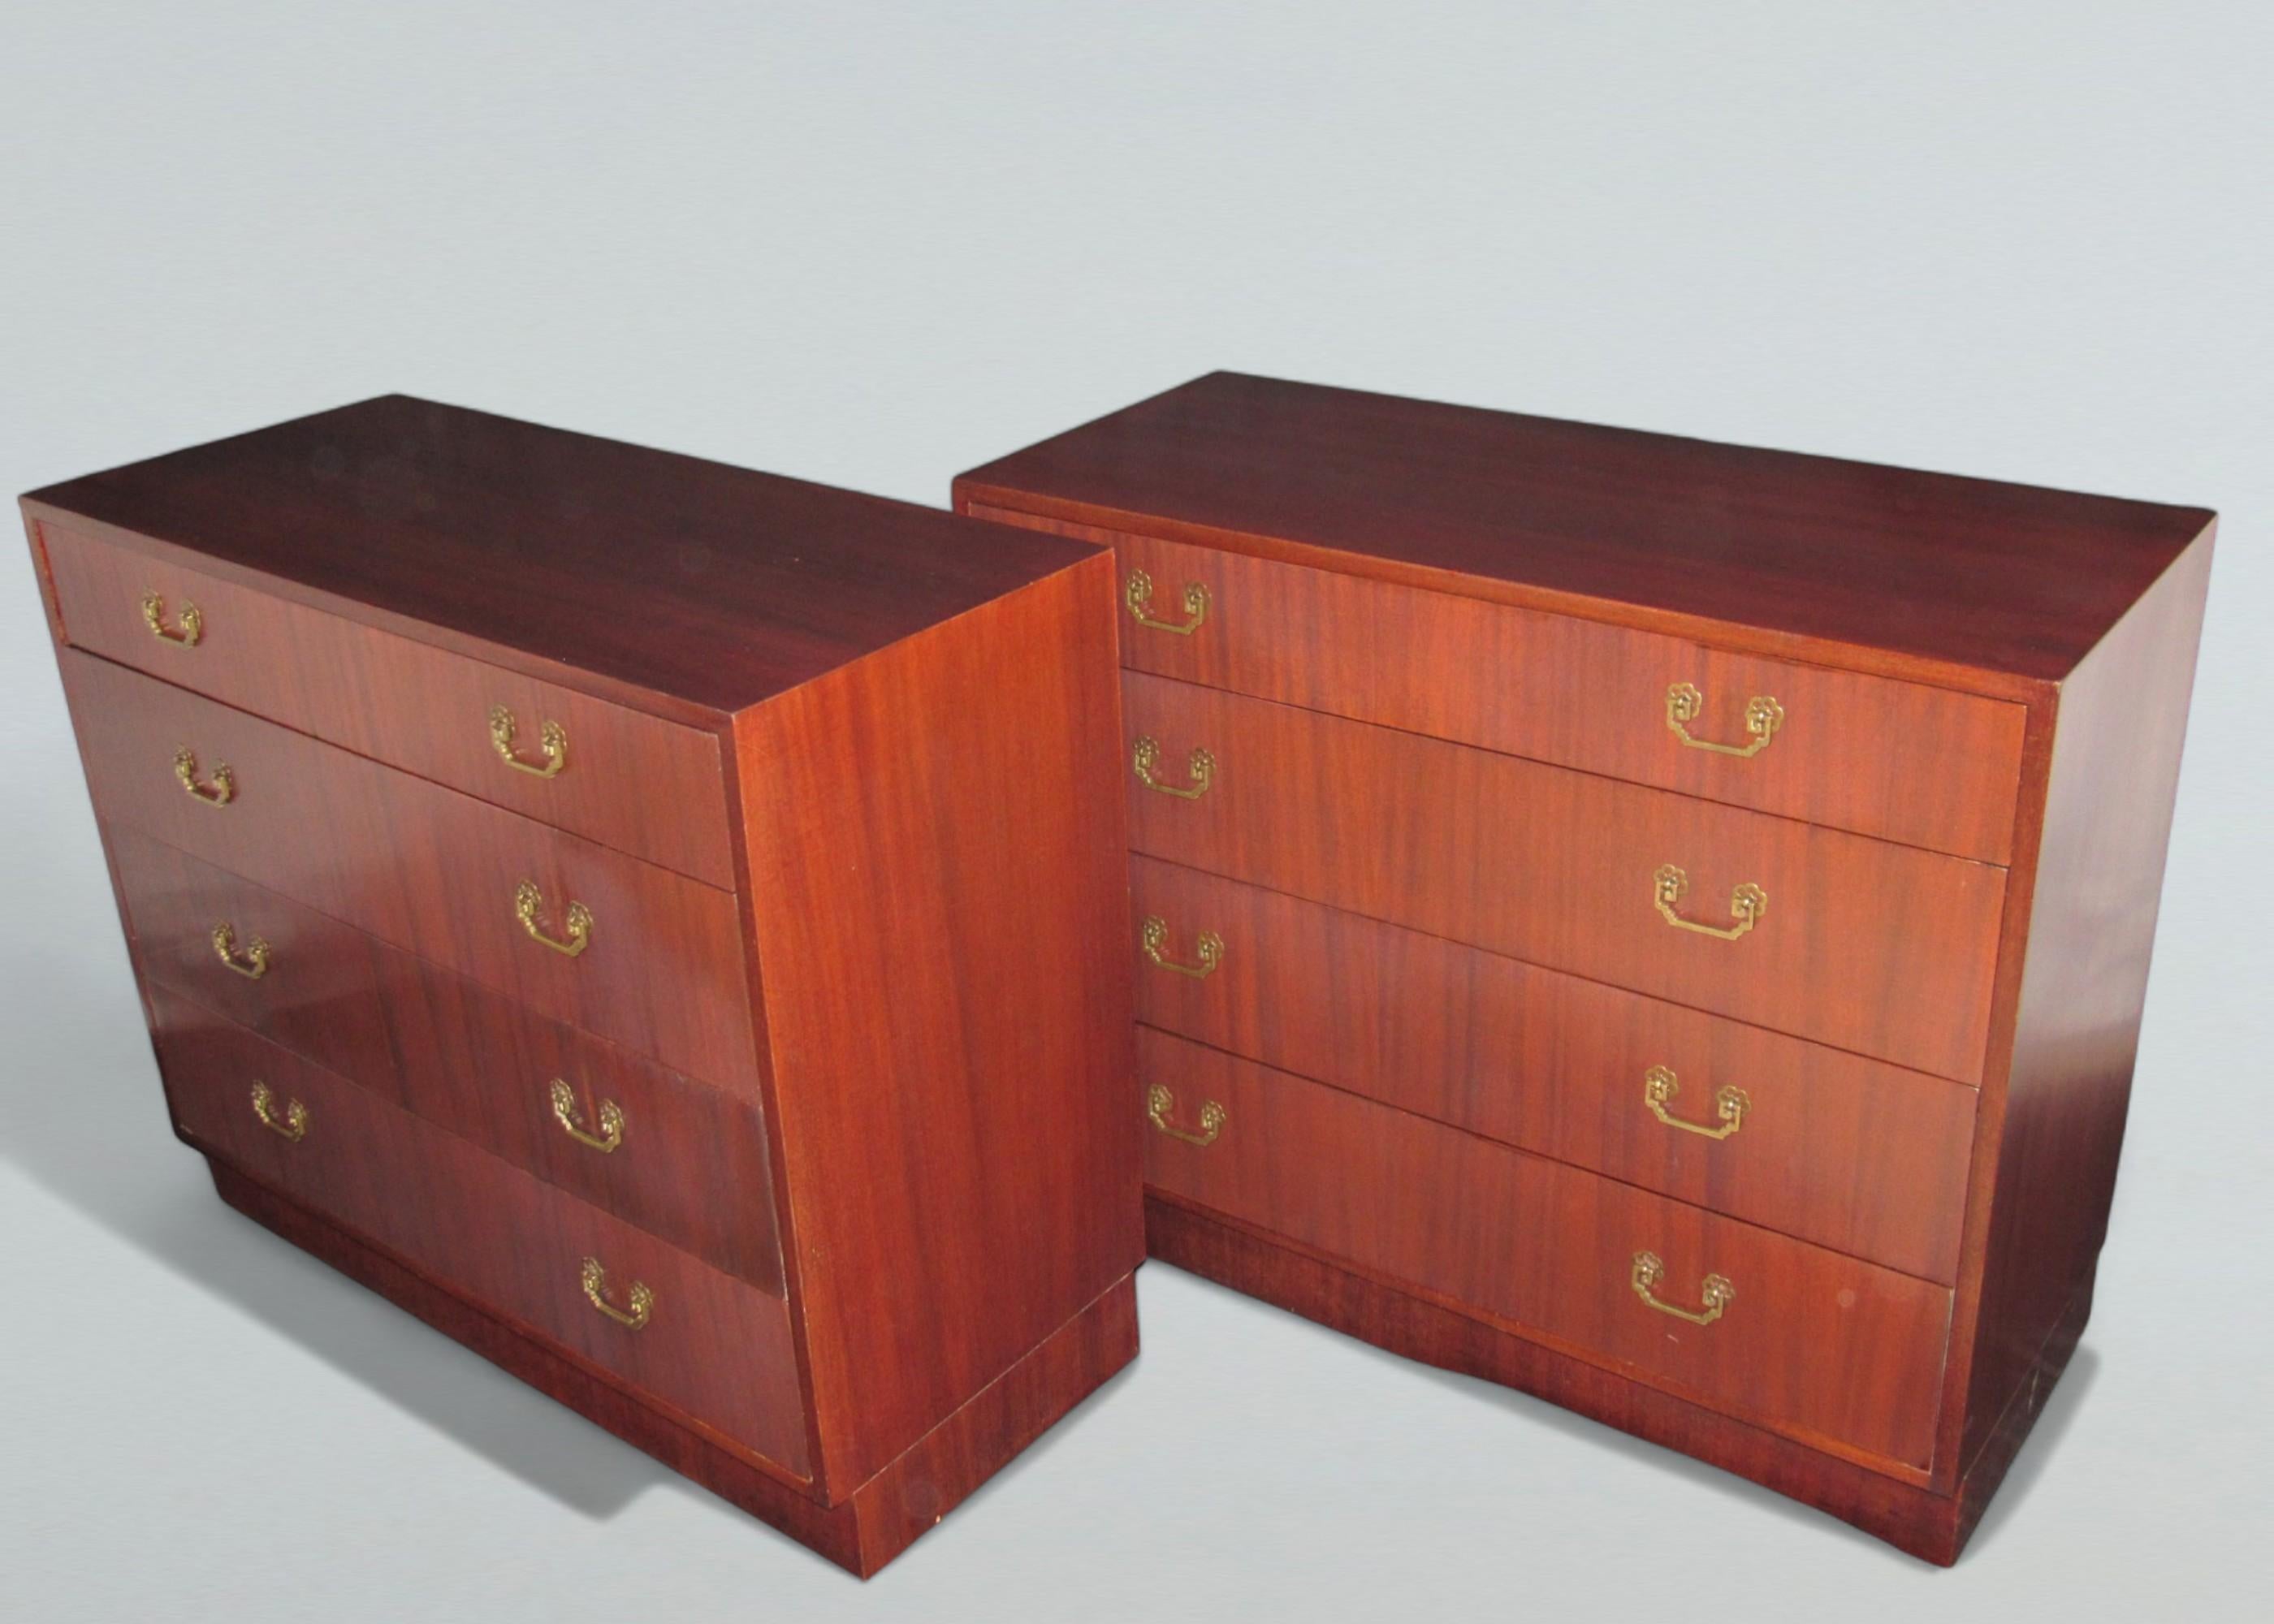 A matched pair of four-drawer Mahogany dressers from the 1940s.
Measures: The set back bases are 4 inches high.
The dressers are in excellent condition.